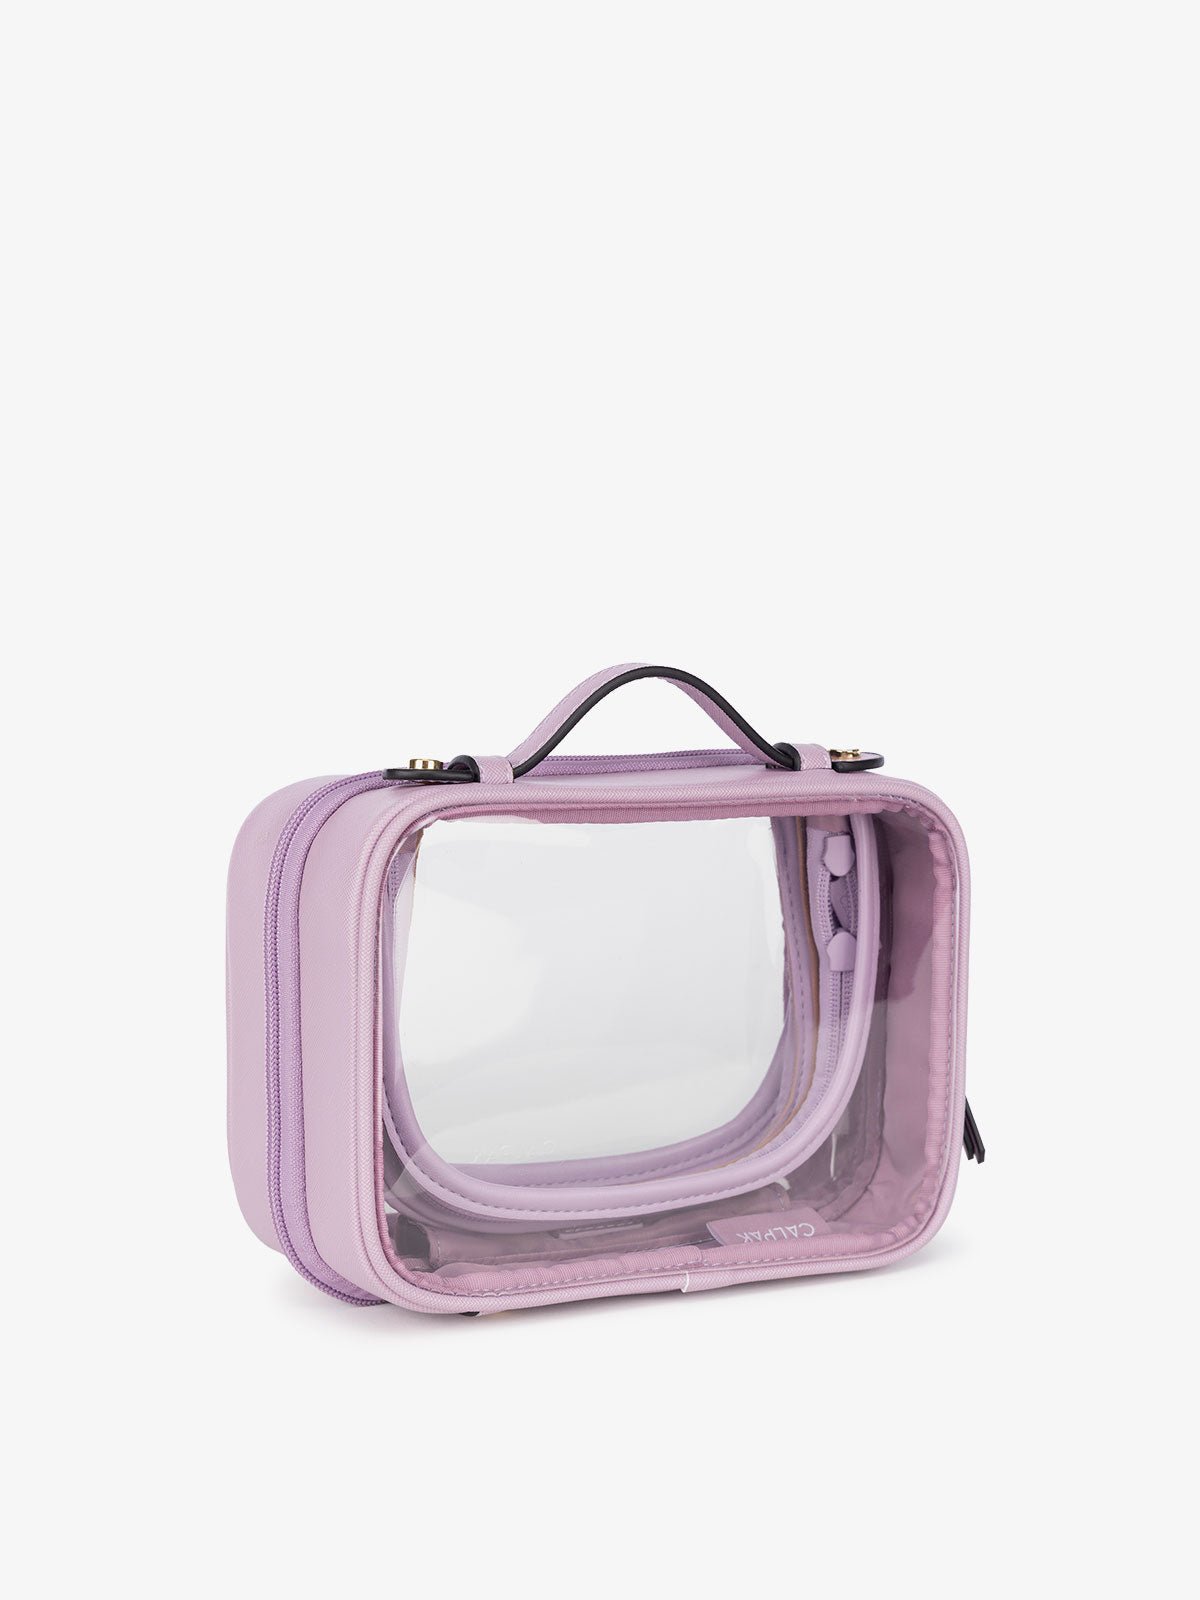 transparent small travel cosmetic bag in lavender purple